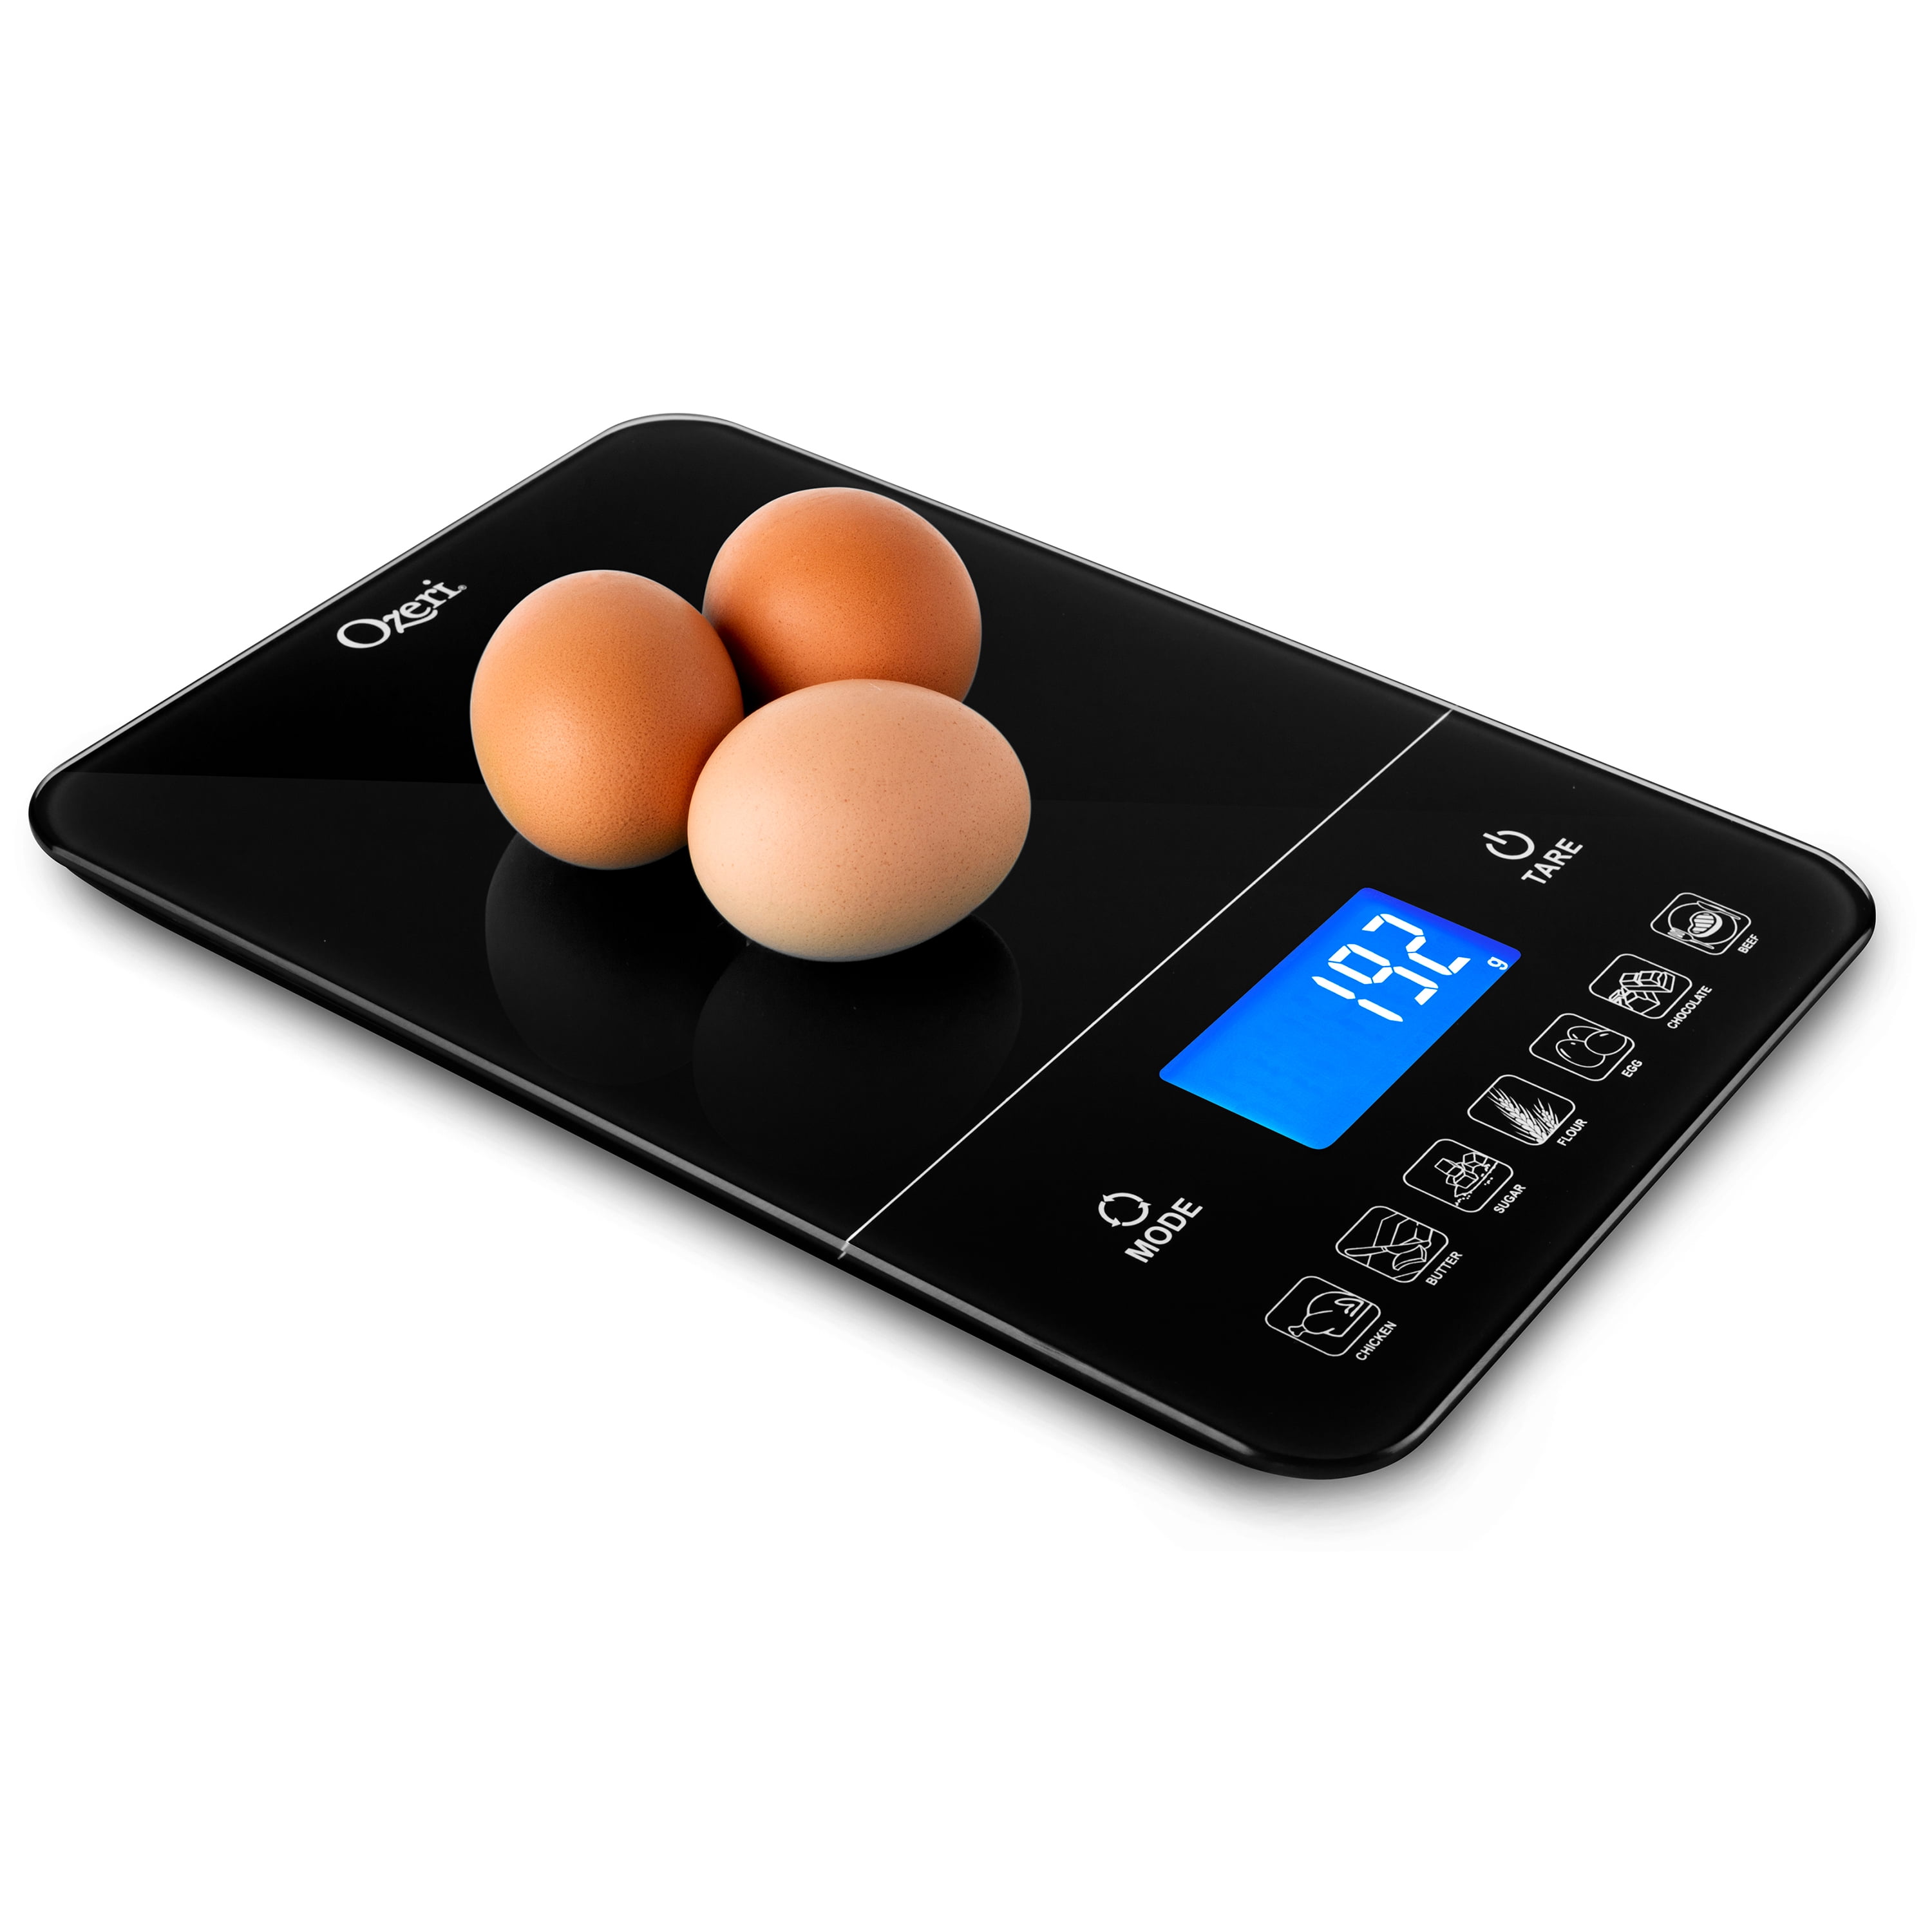 Tomiba Digital Food Scale 11 lbs for Kitchen Baking Scale Digital Weight Grams and Ounces EK6011C